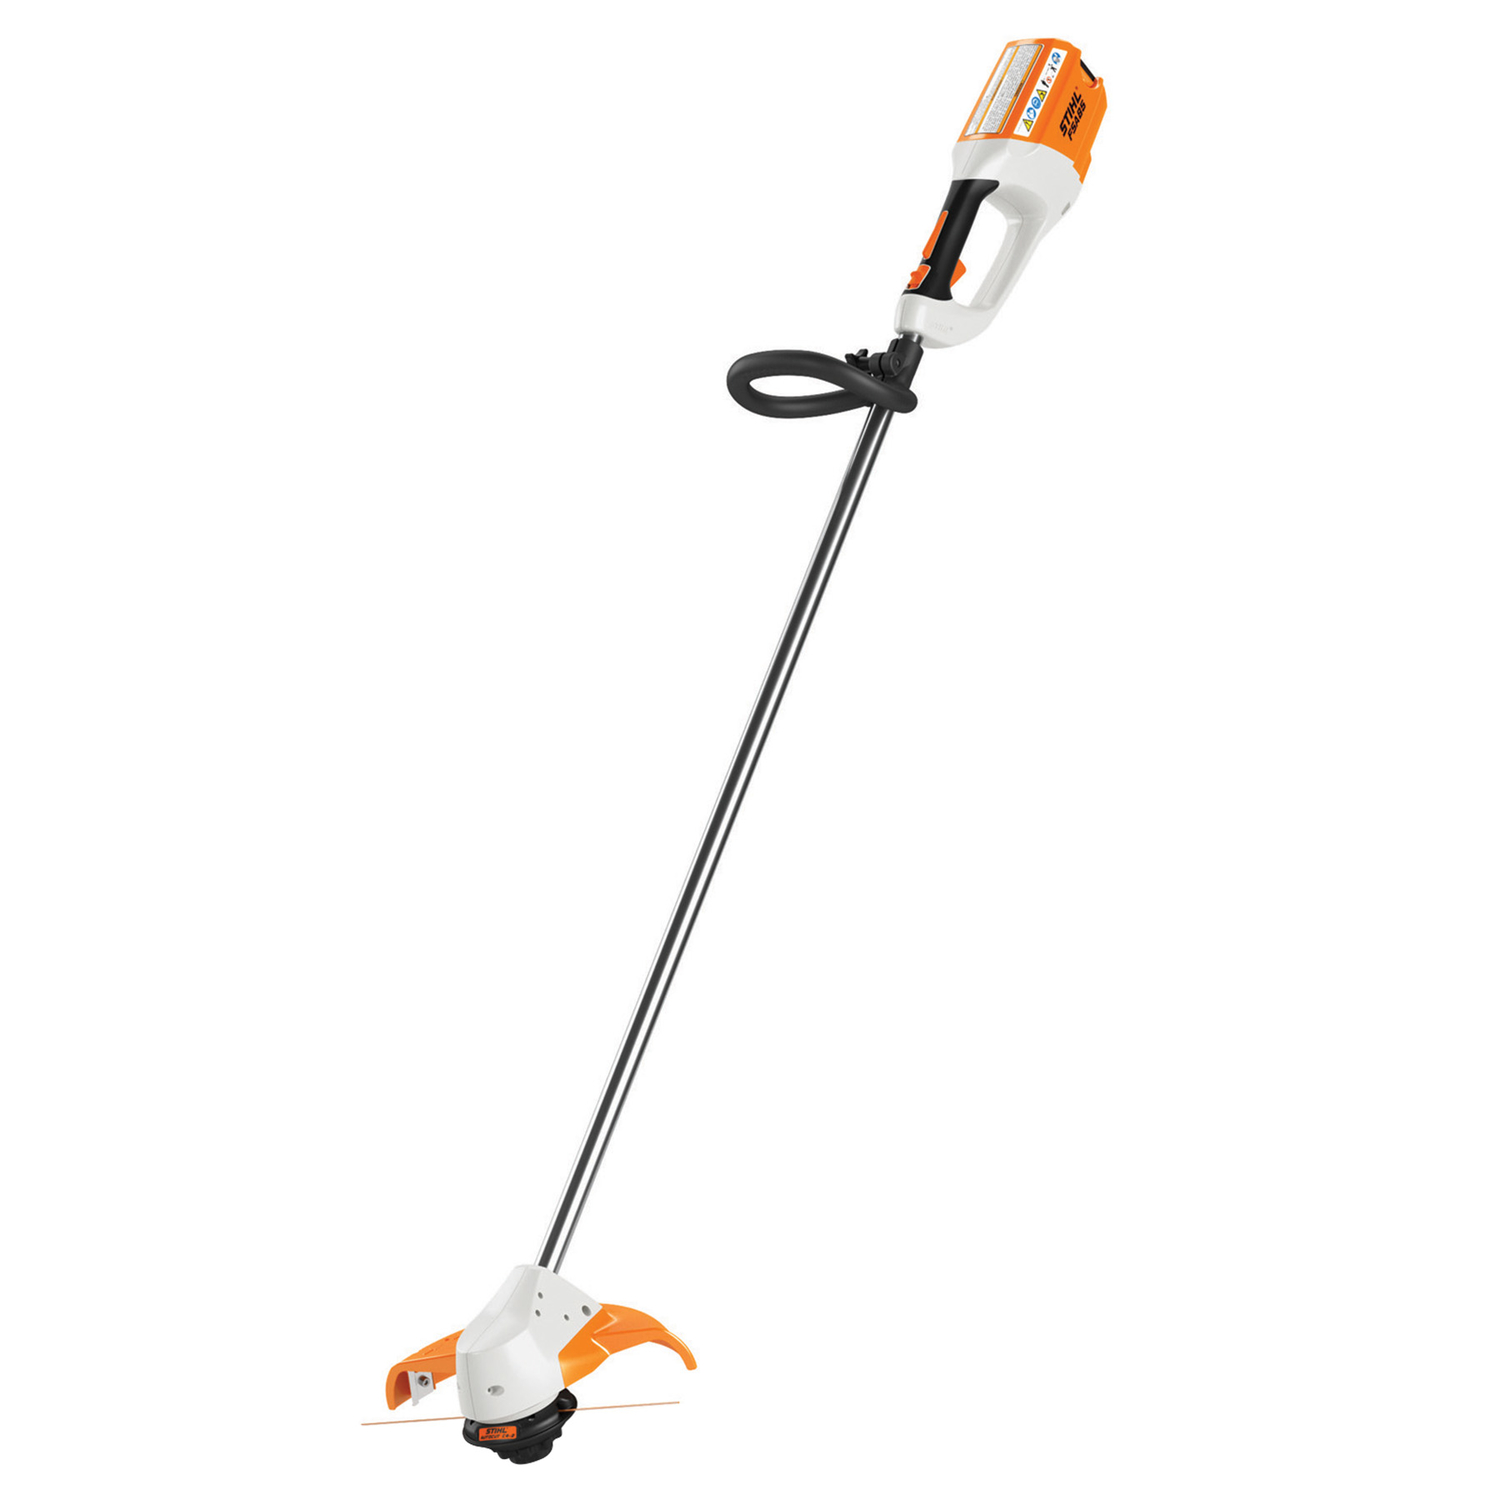 stihl electric weed eater